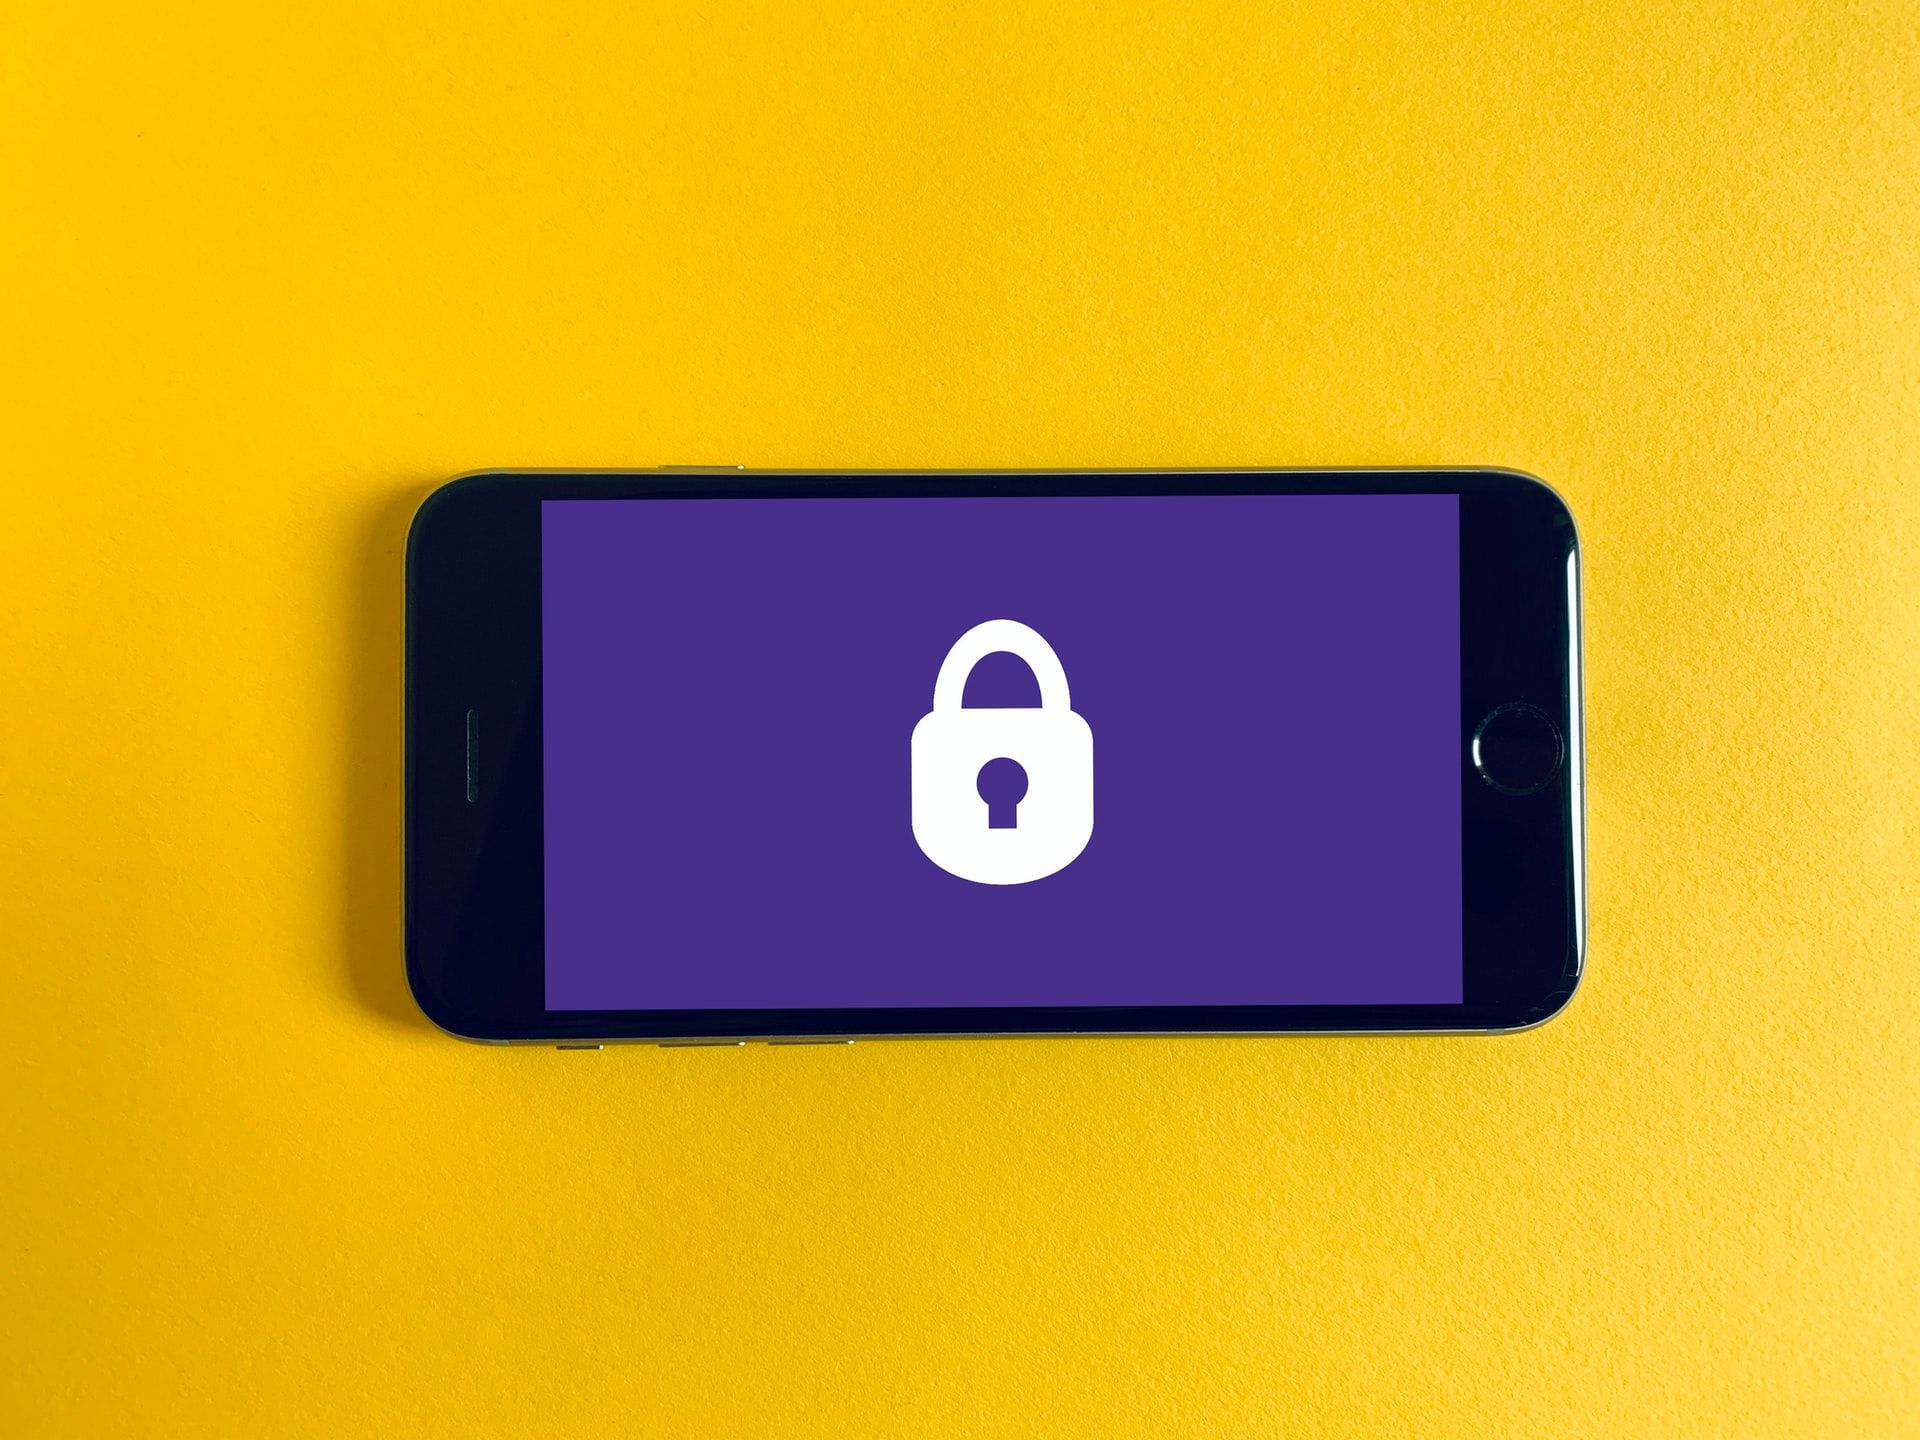 Phone with purple screen and white lock